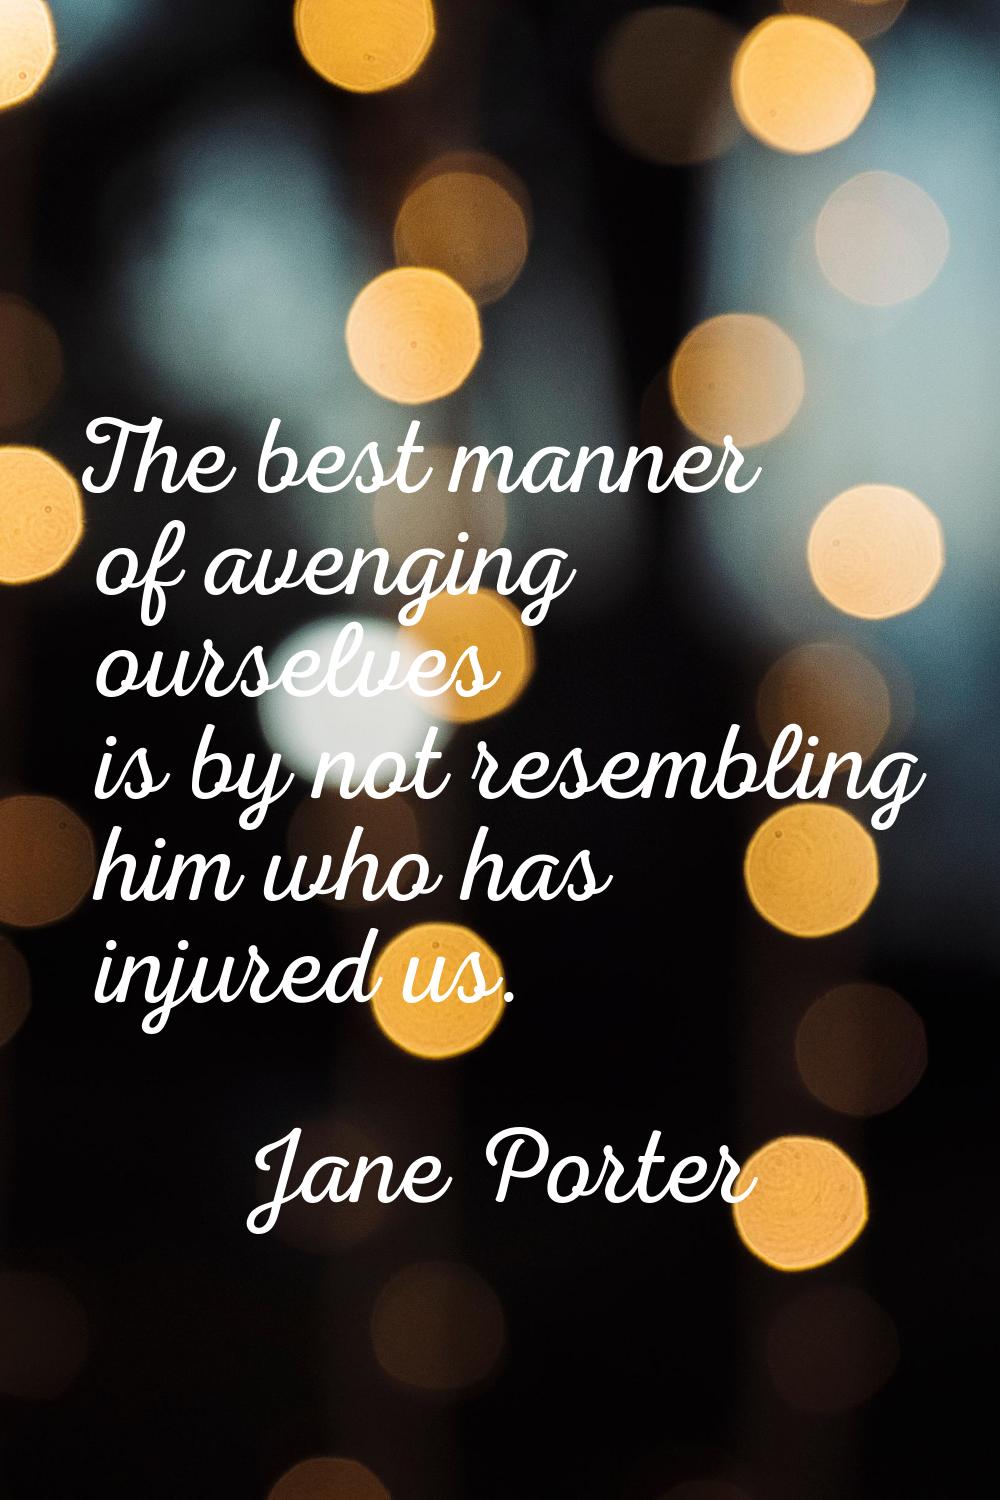 The best manner of avenging ourselves is by not resembling him who has injured us.